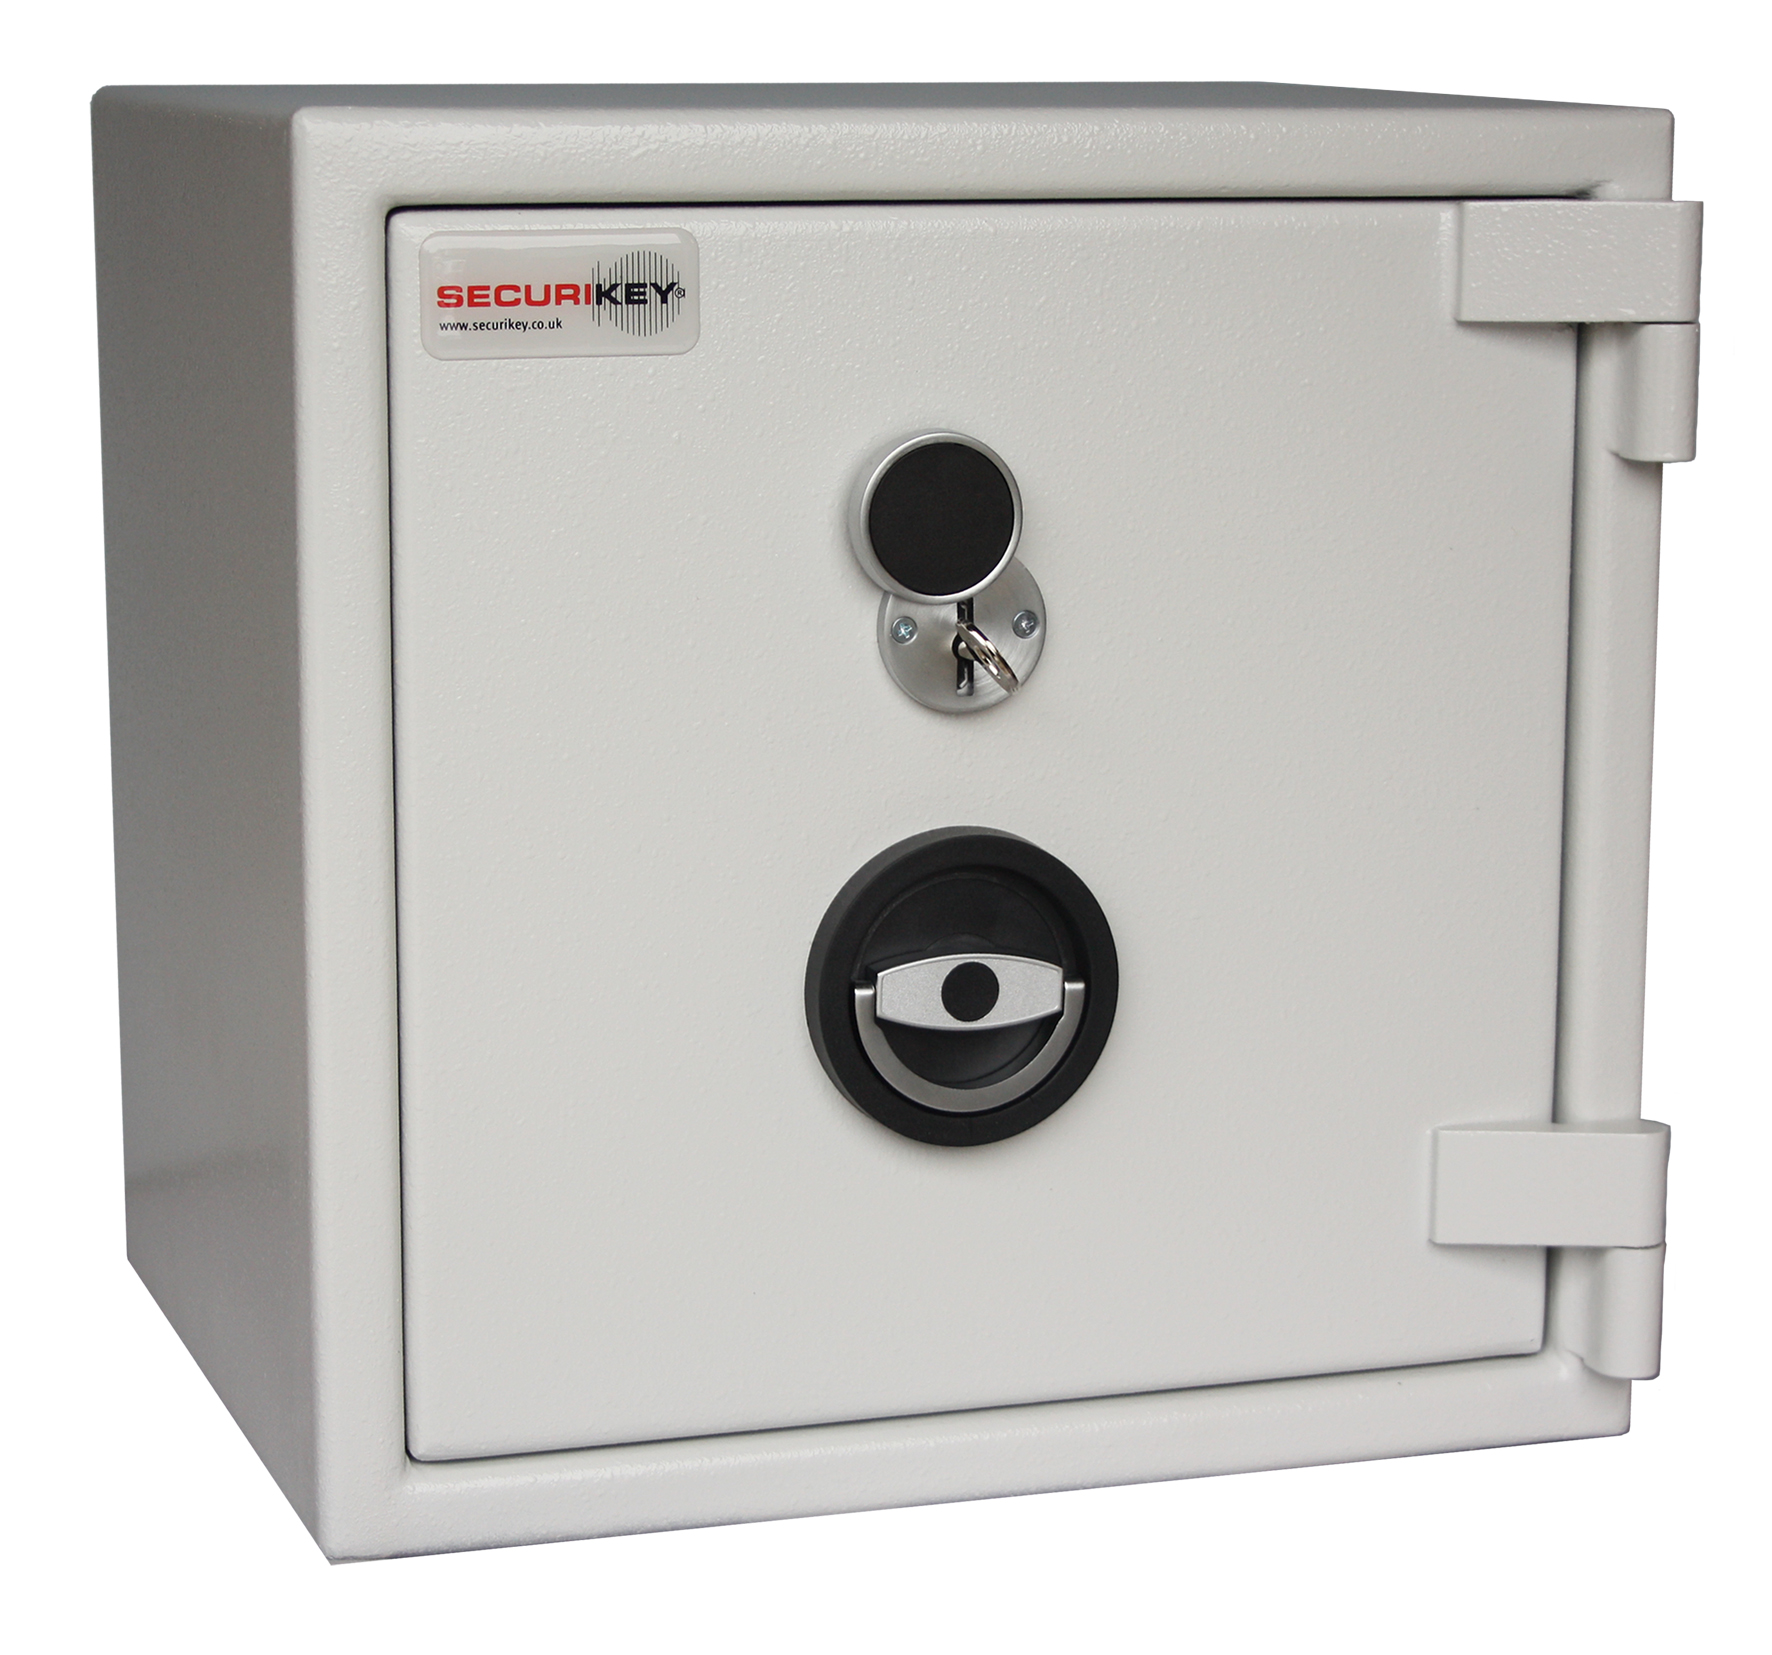 Securikey Euro Grade 0 0025k with high security key lock. An excellent safe for the home